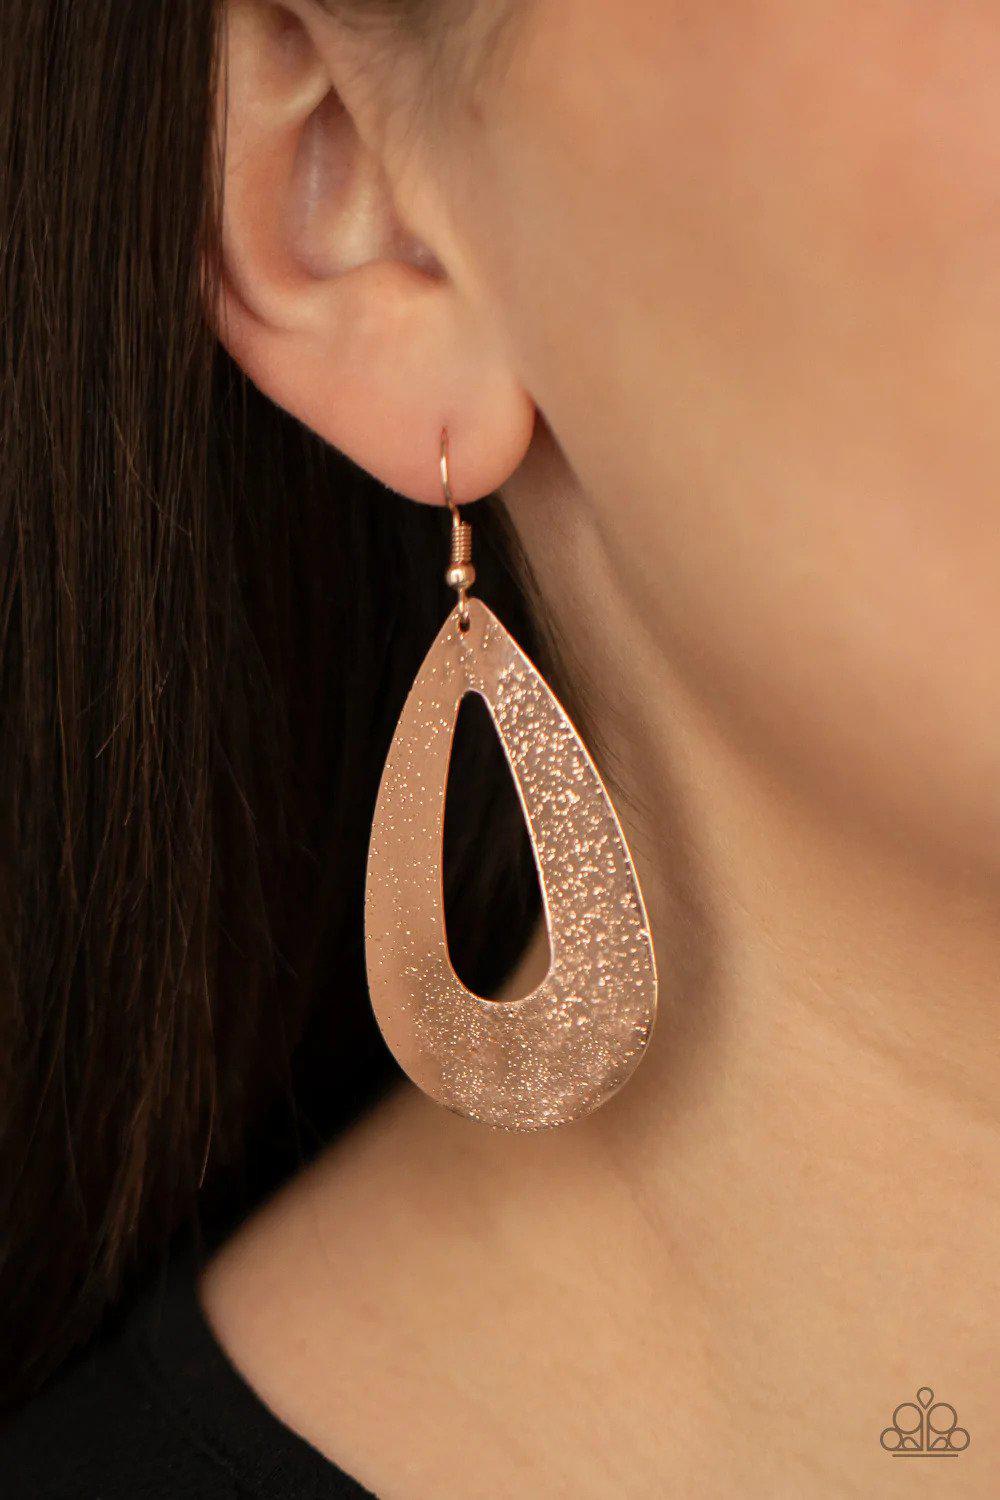 Hand It OVAL! Rose Gold Earrings - Paparazzi Accessories- on model - CarasShop.com - $5 Jewelry by Cara Jewels